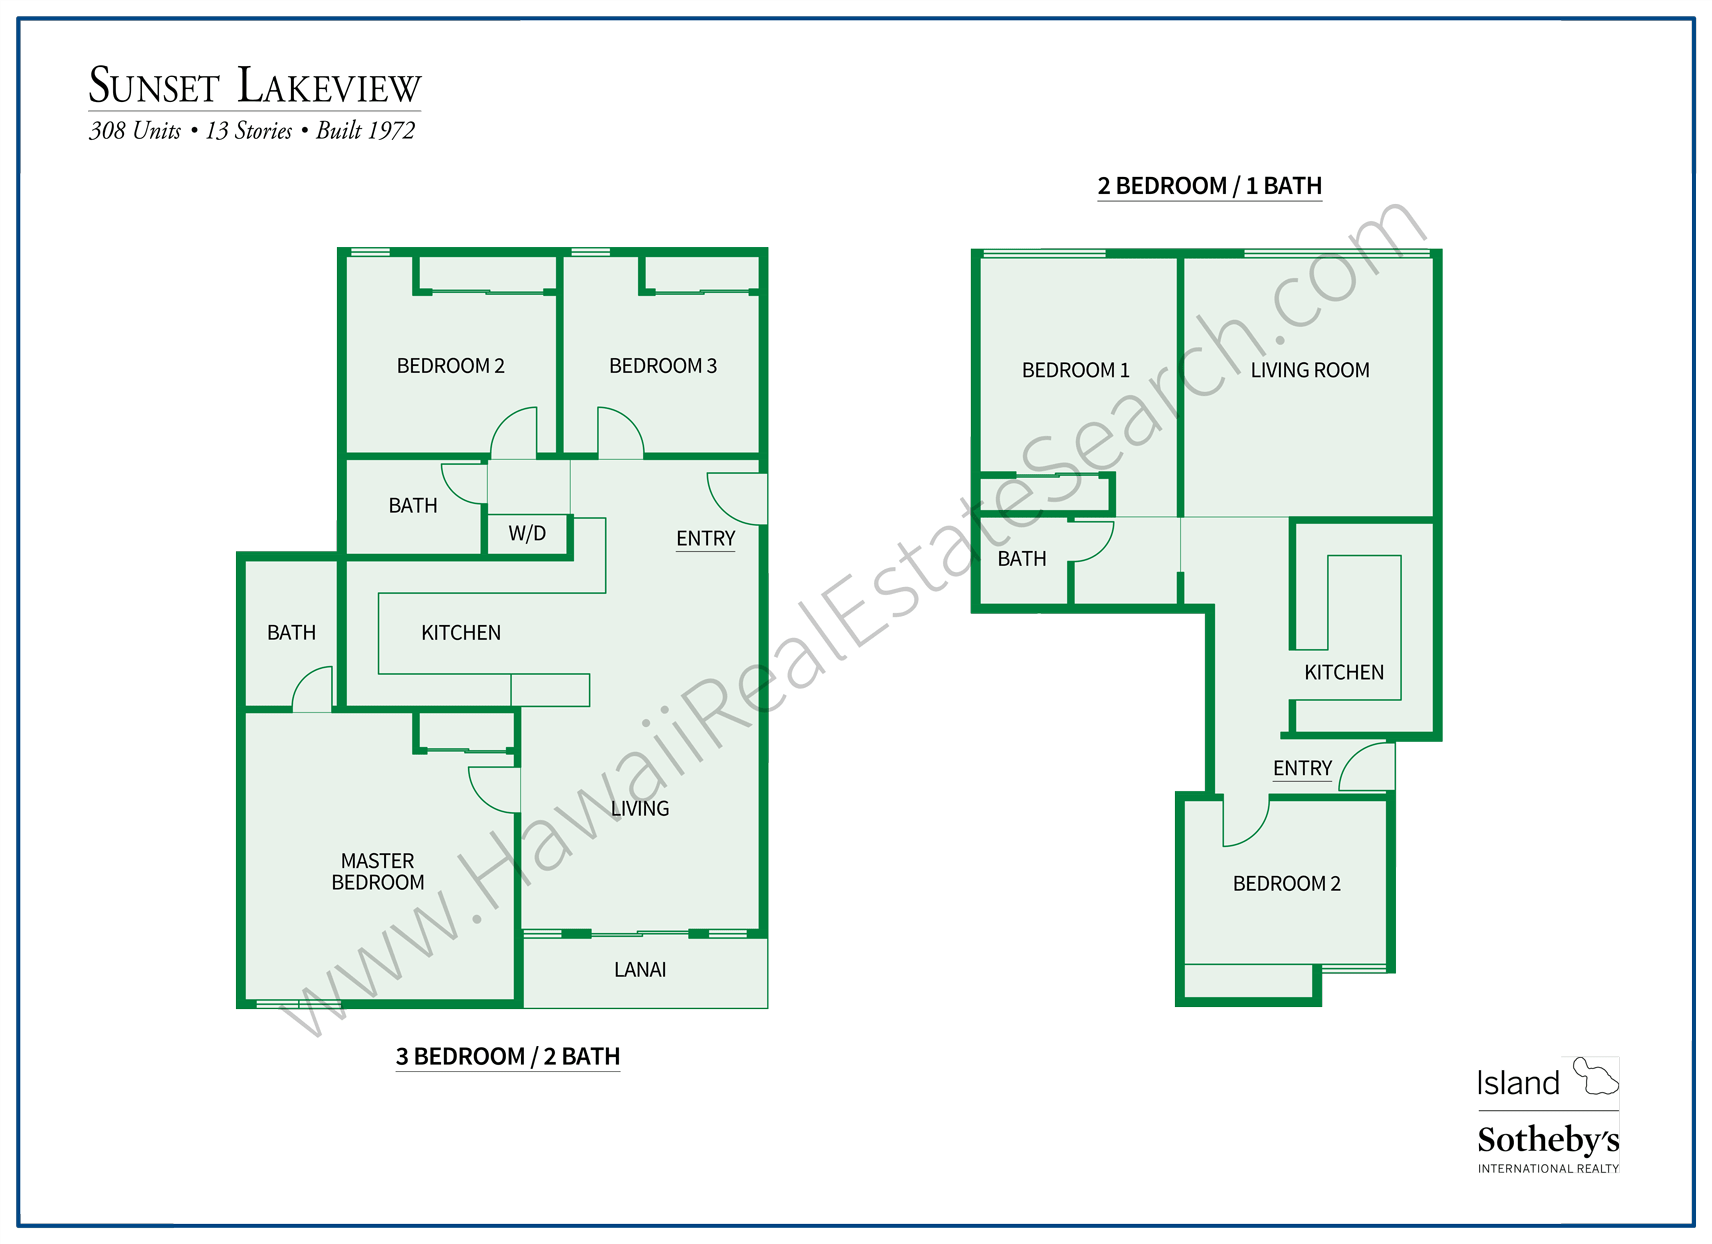 Sunset Lakeview Floor Plans